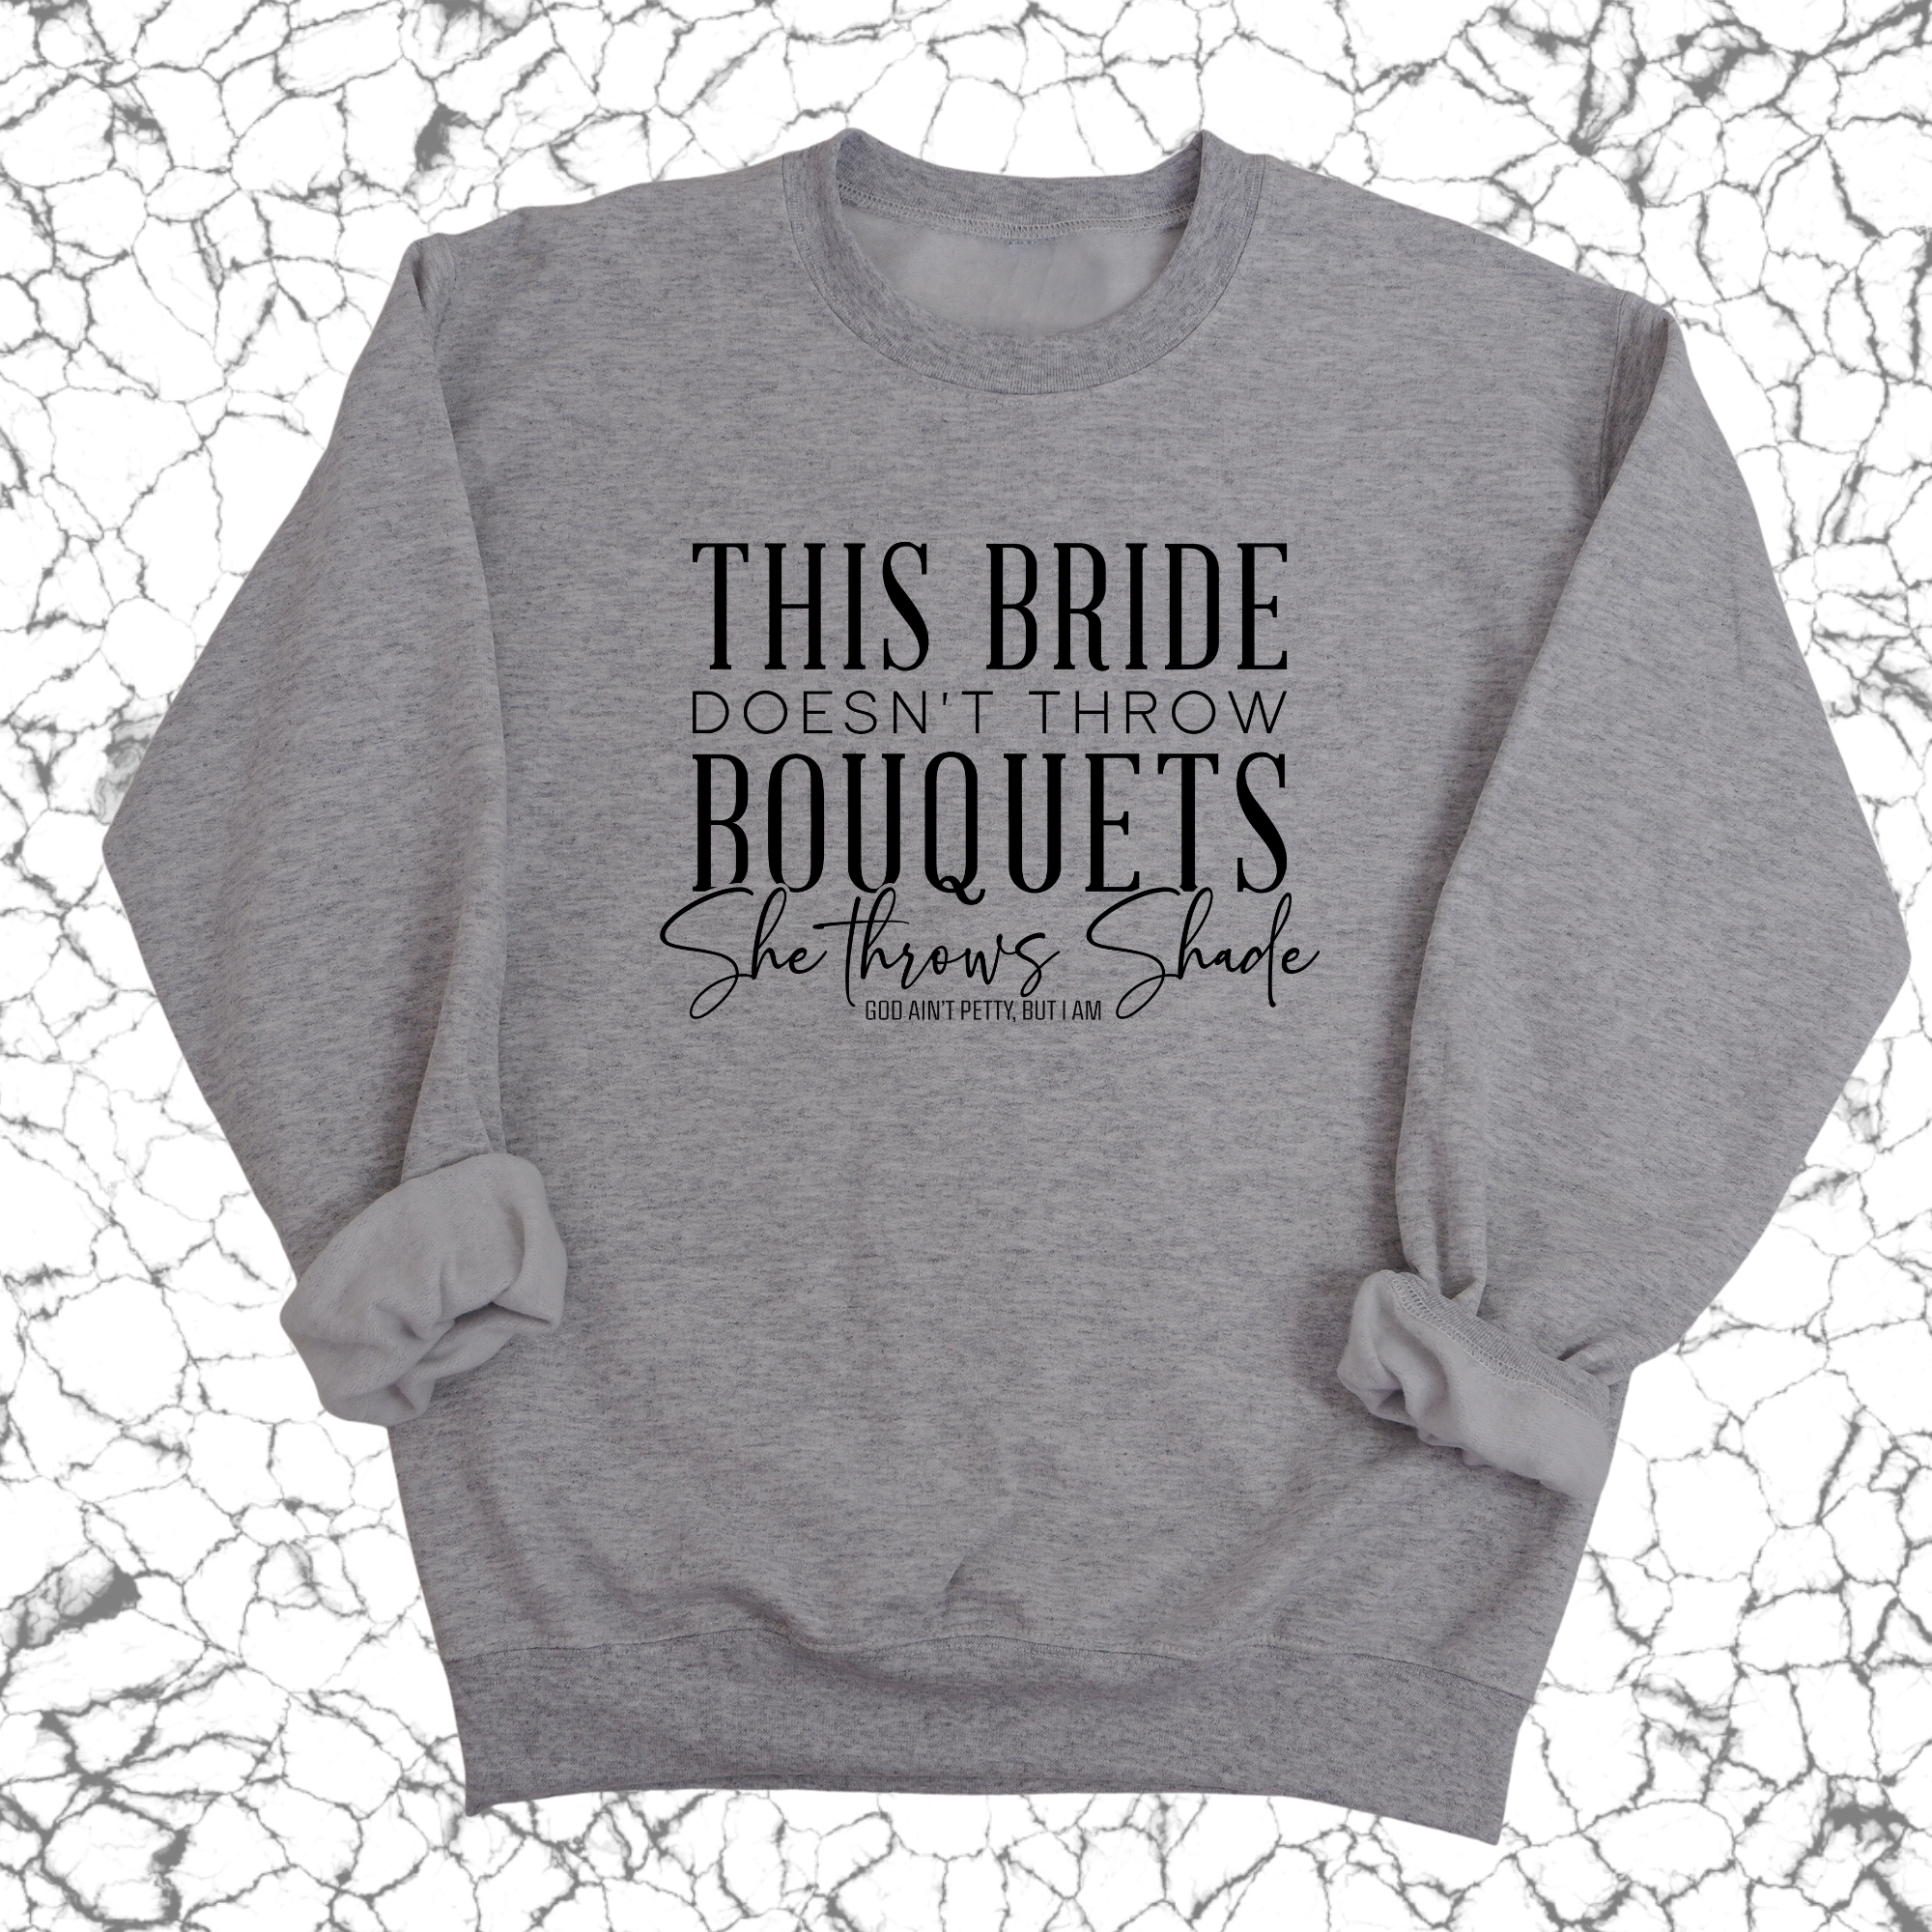 This bride doesn't throw bouquets, She throws shade sweatshirt Unisex Sweatshirt-Sweatshirt-The Original God Ain't Petty But I Am